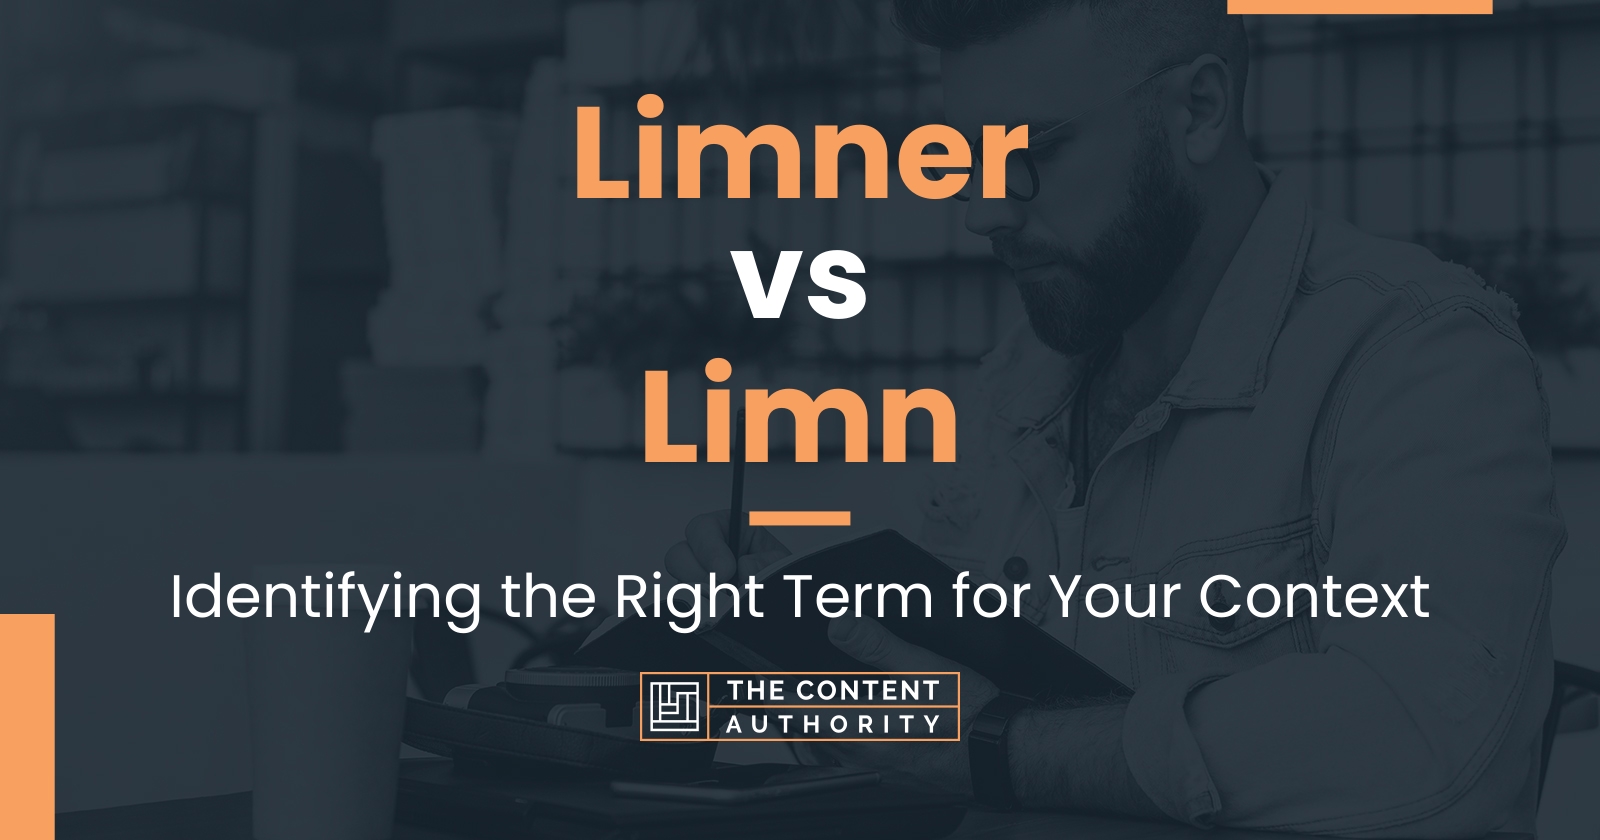 Limner vs Limn: Identifying the Right Term for Your Context